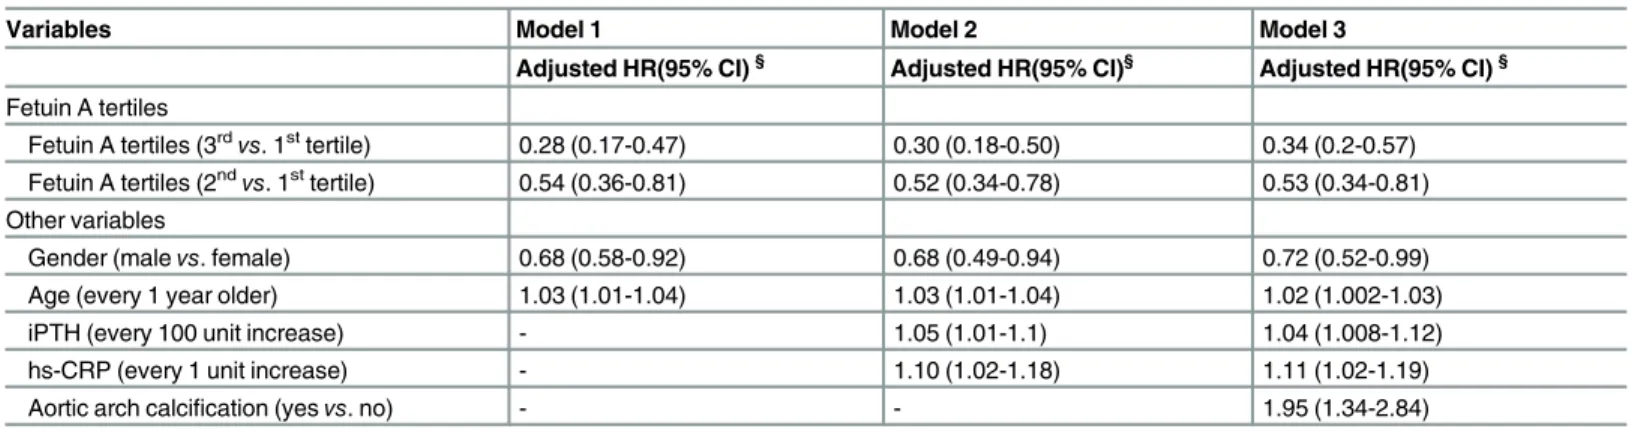 Table 3. Hazard ratios (HRs) of fetuin A tertiles in predicting the occurrence of major fractures using different Cox proportional hazard regression models.